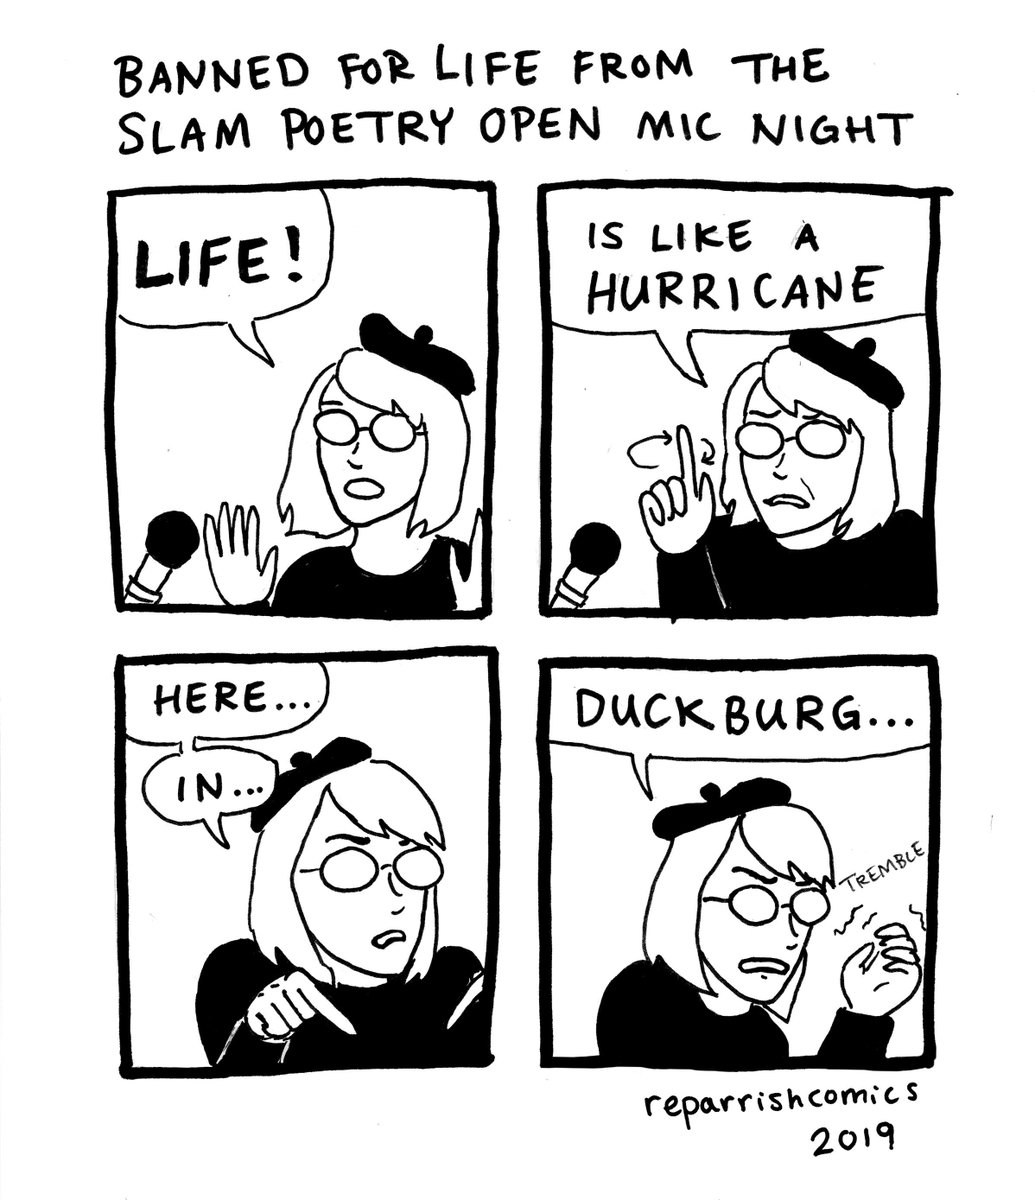 10 minute comic: banned for life from the slam poetry open mic night.